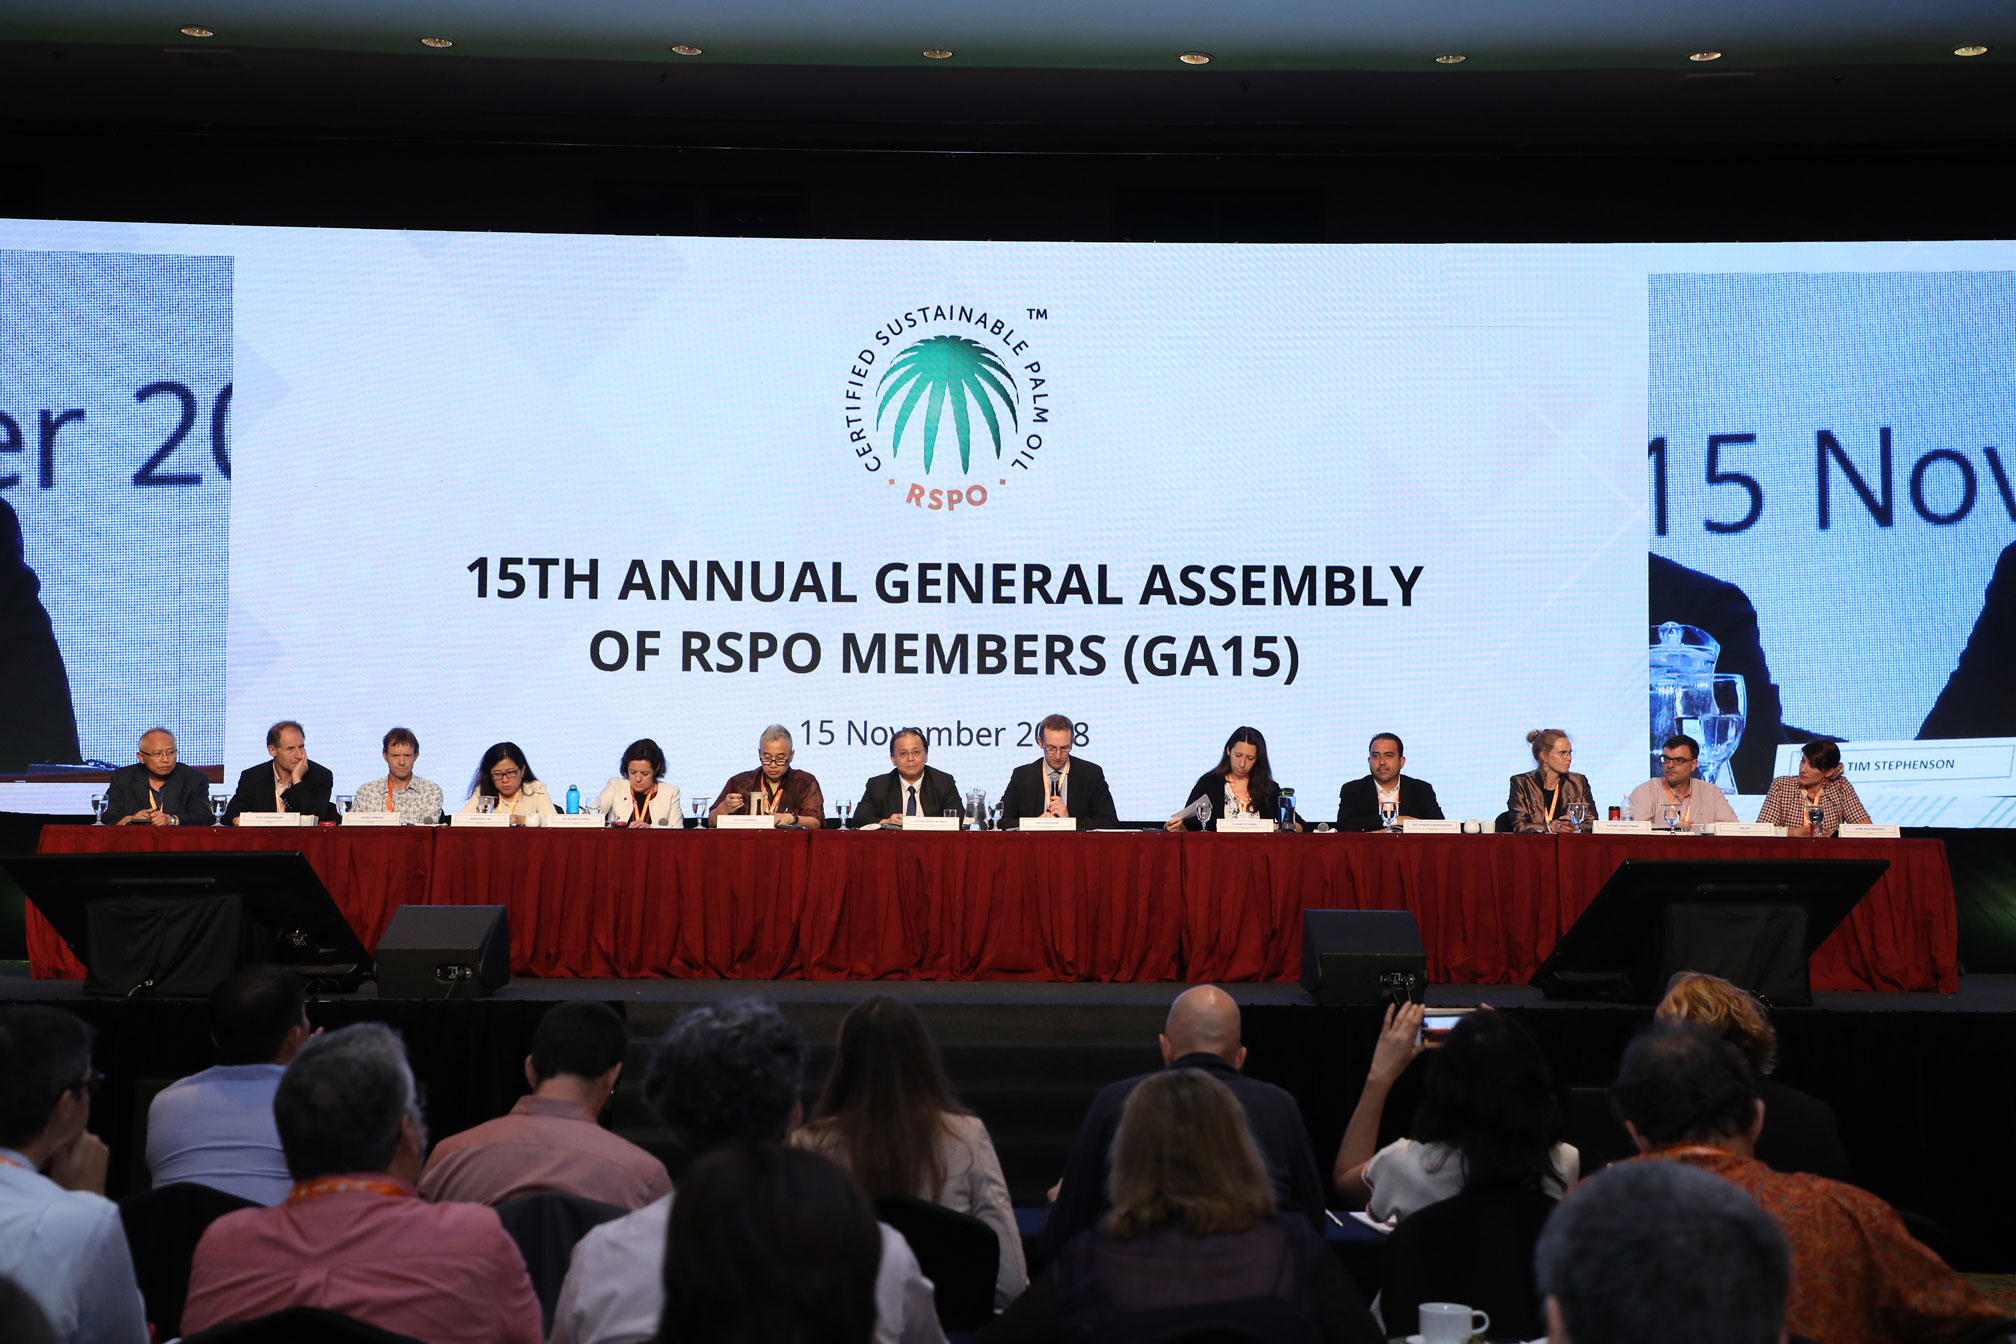 RSPO Agree in New Palm Oil Standard to Halt Deforestation and Improve Human Rights Protection